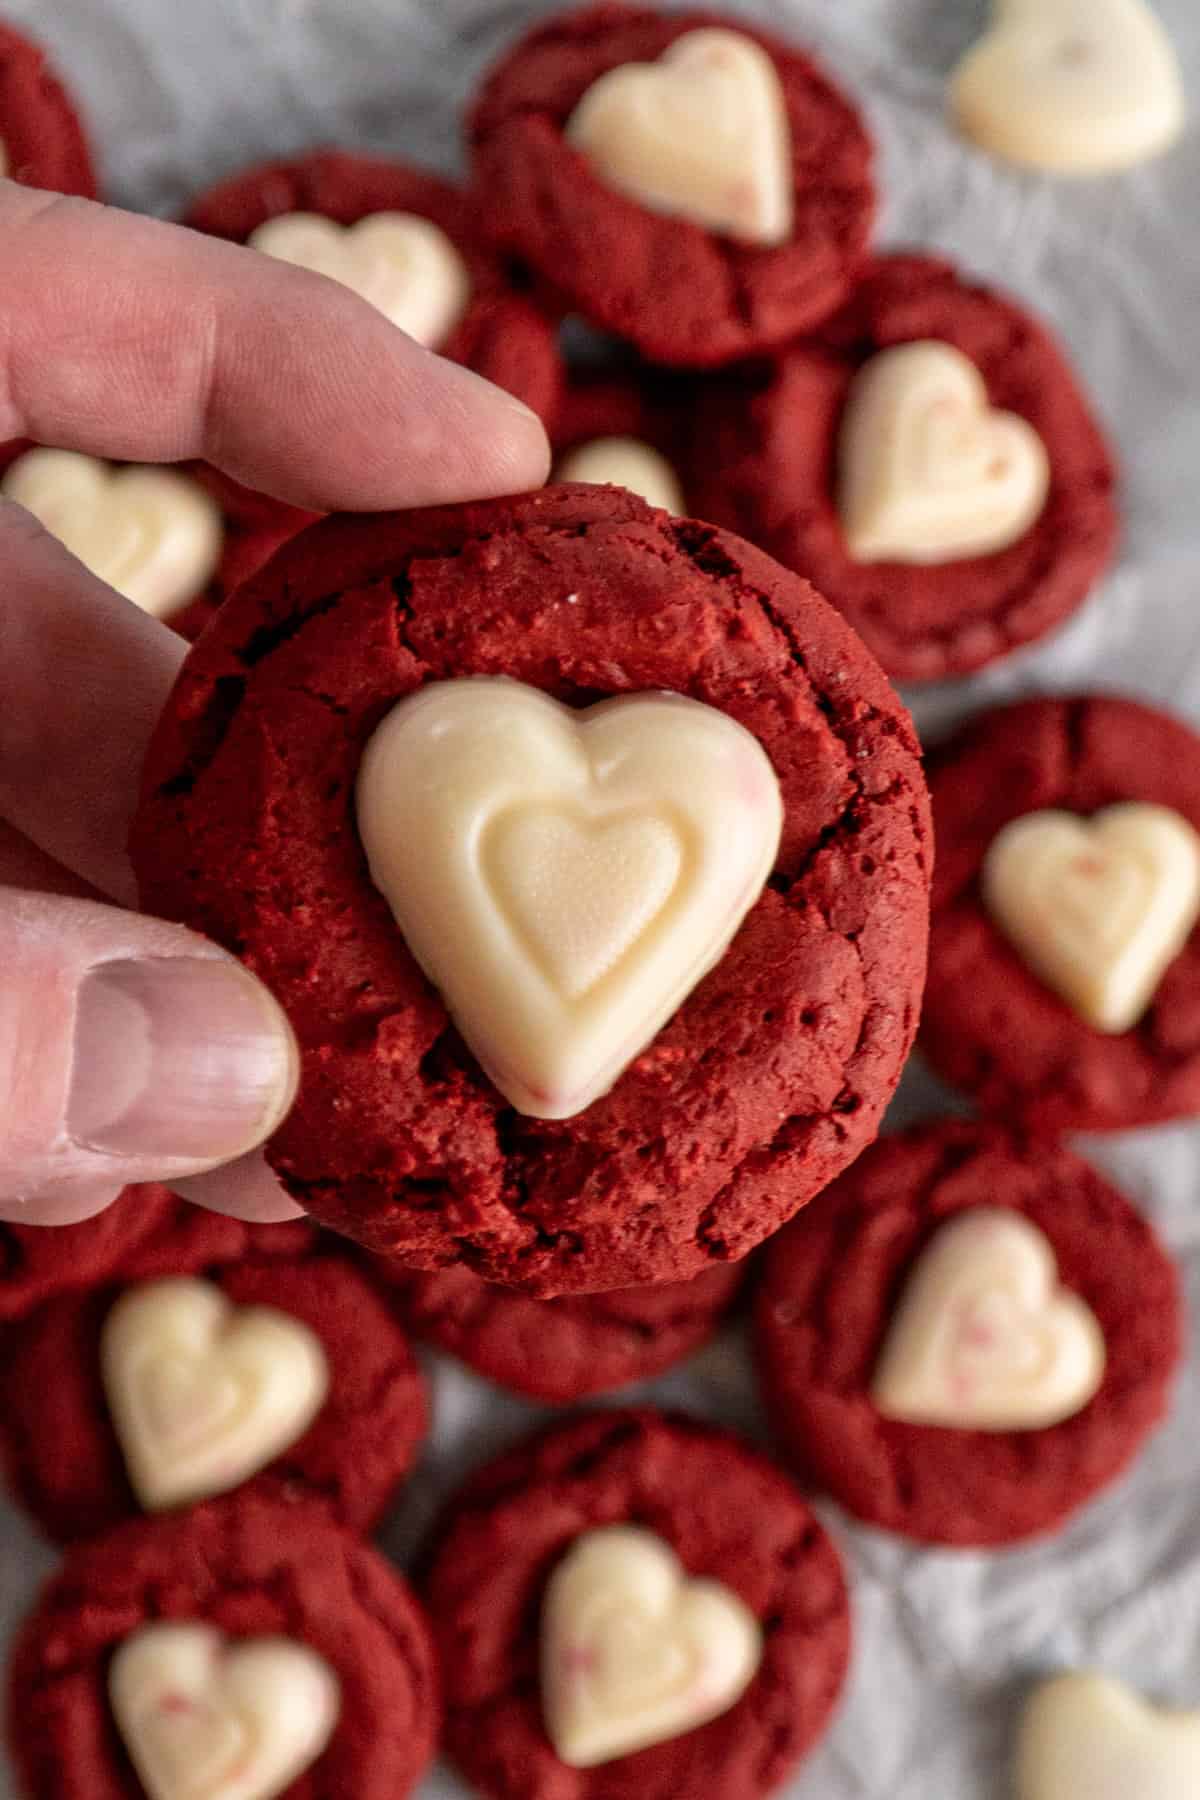 A hand holding a cookie with a chocolate heart in the center of it.